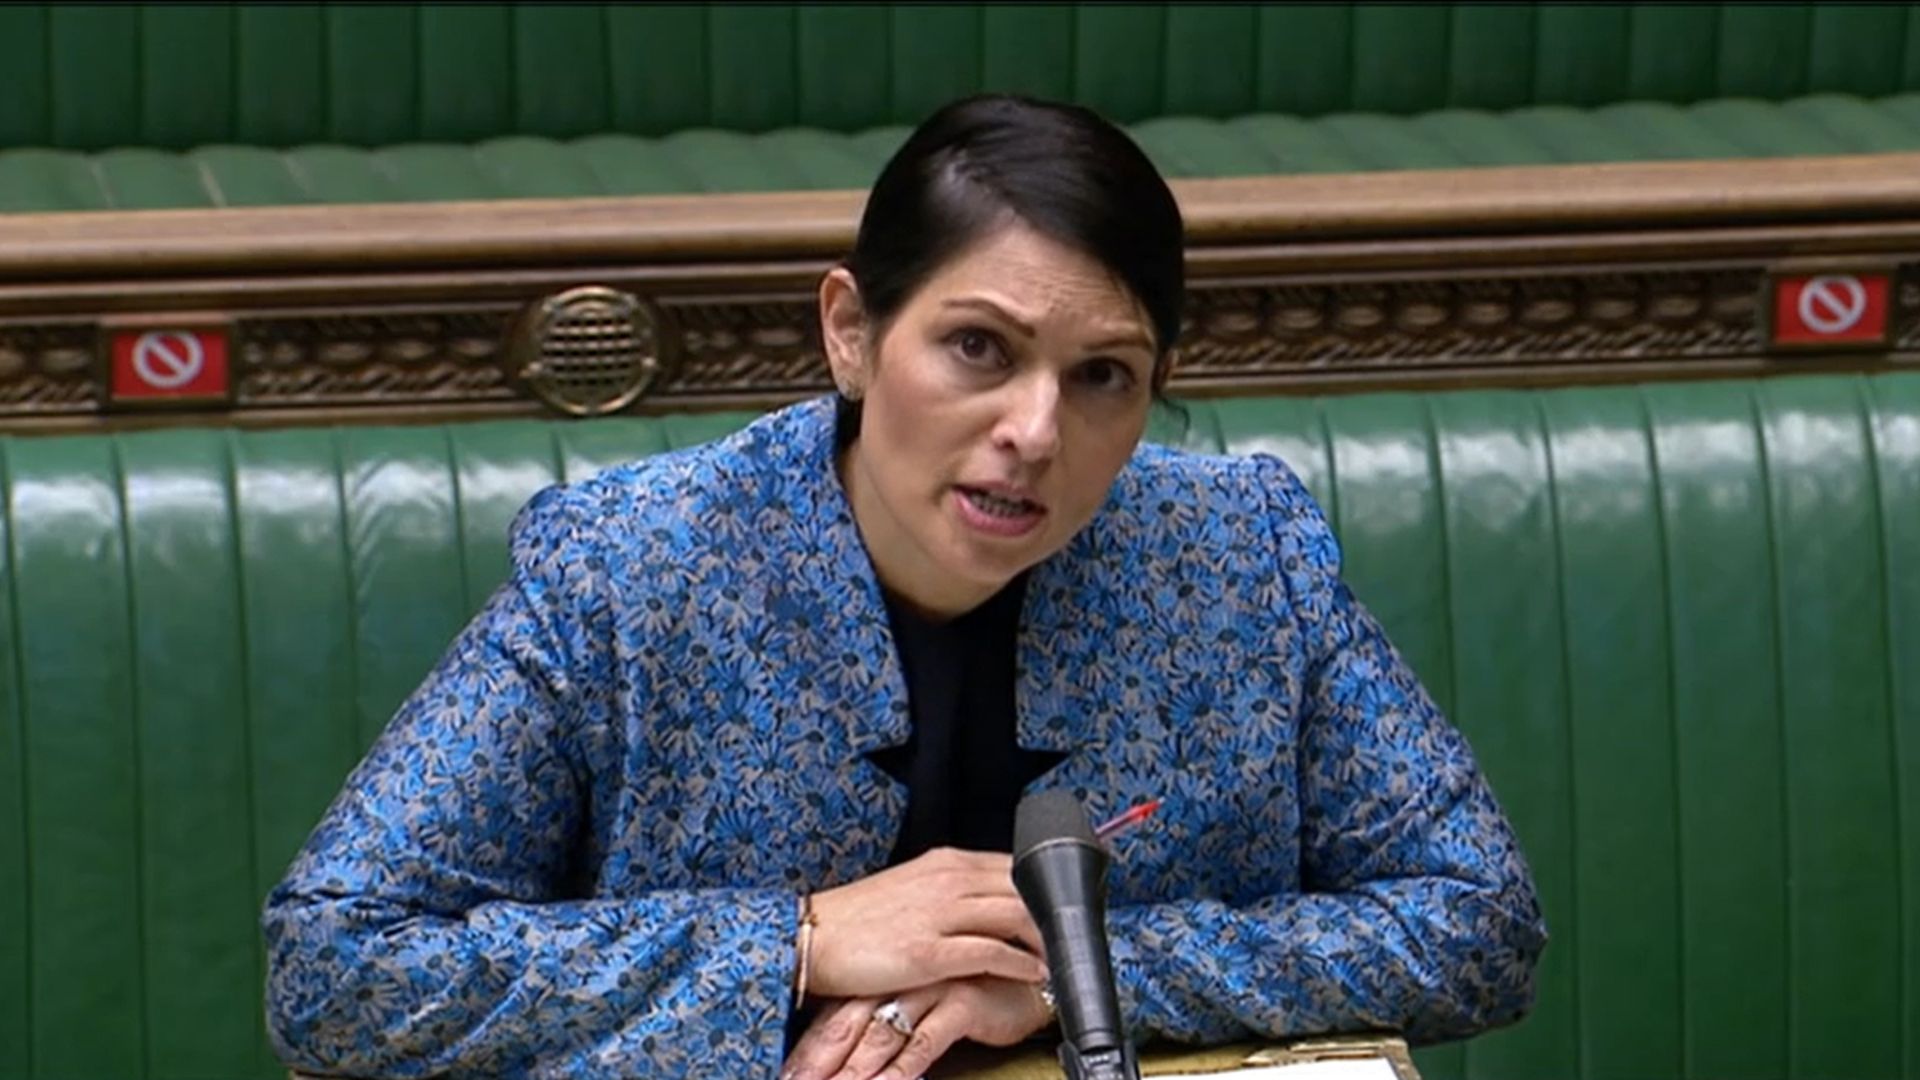 Home secretary Priti Patel speaking in the House of Commons - Credit: PA